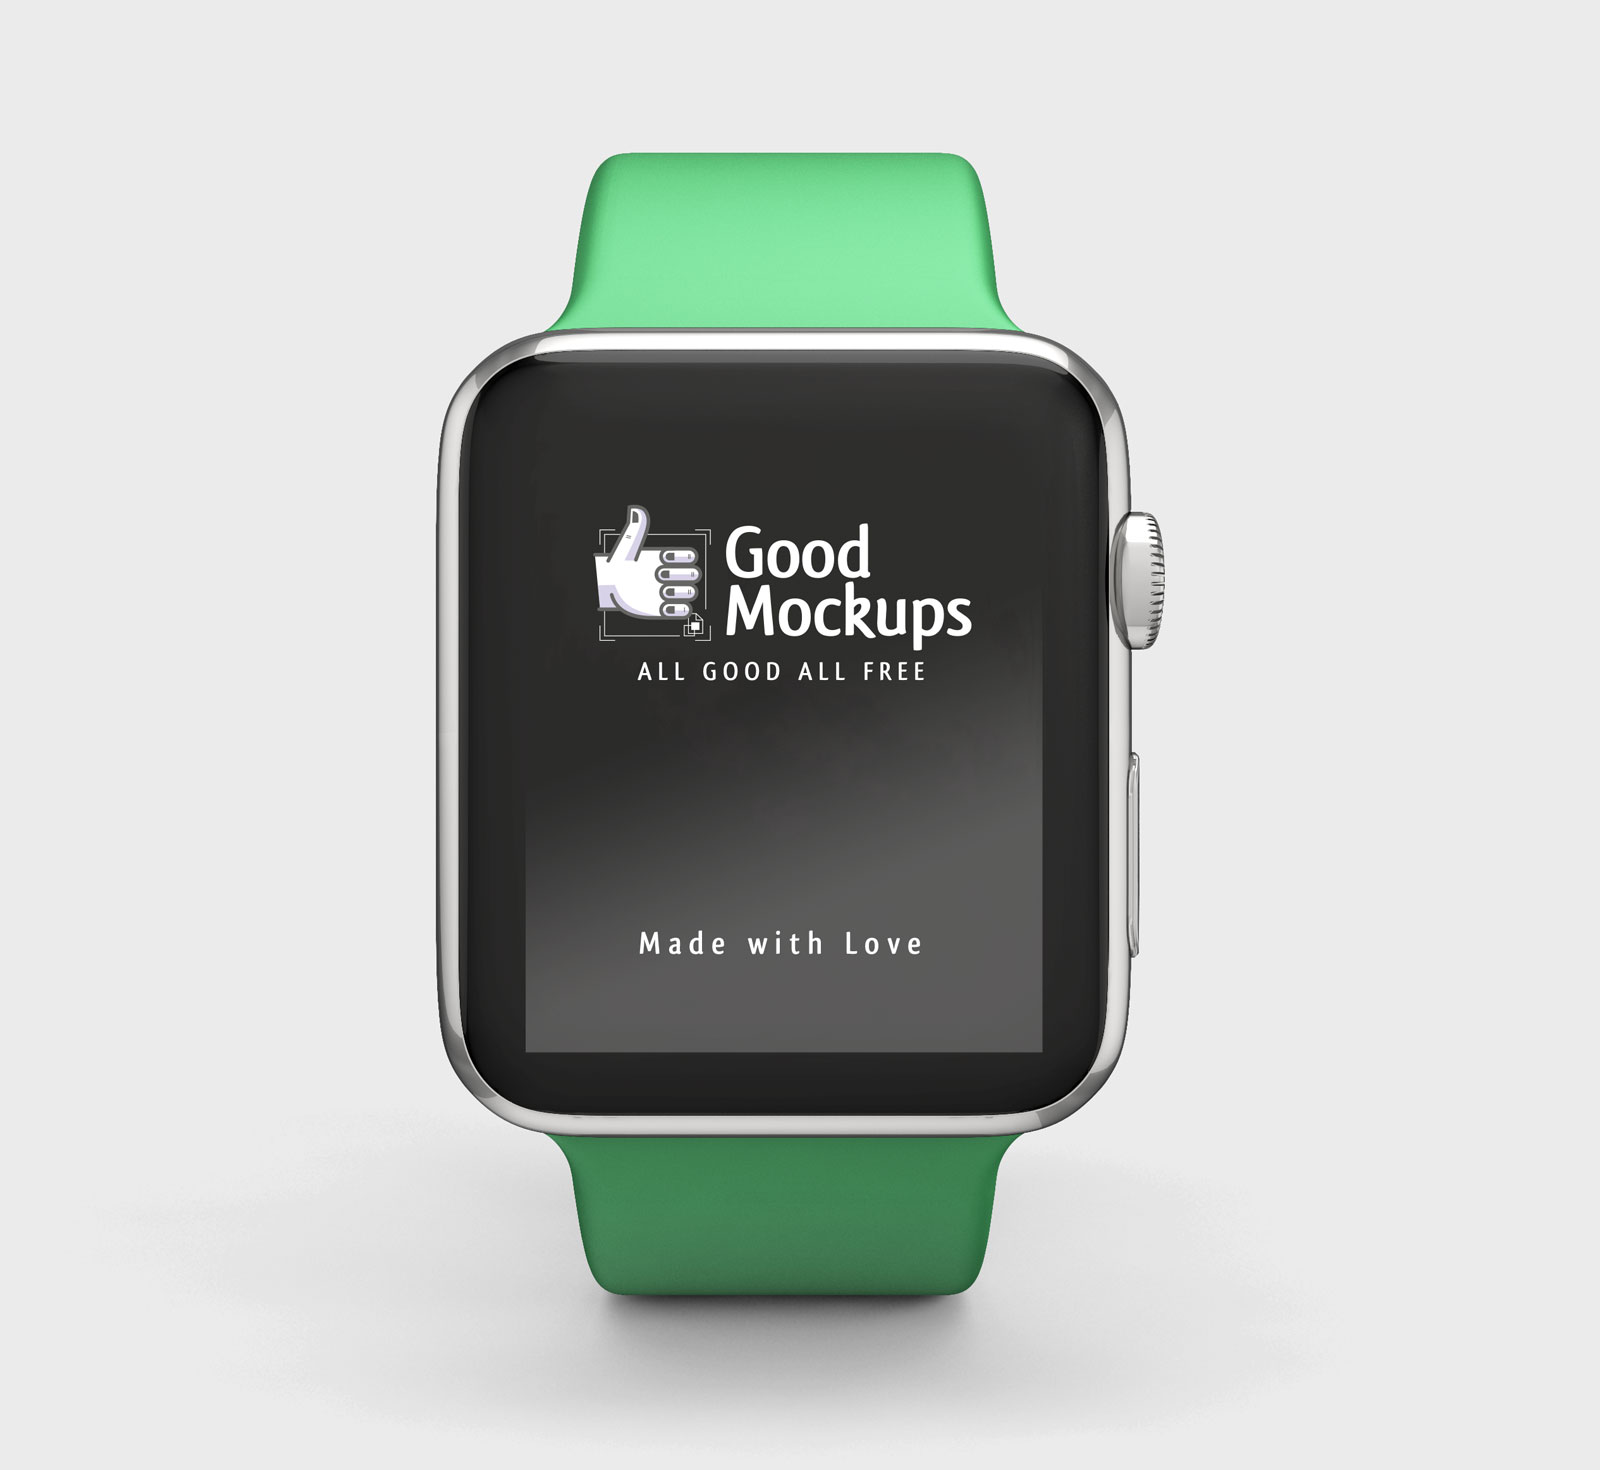 Download Free Apple Watch Mockup PSD with Changeable Sport Band ...